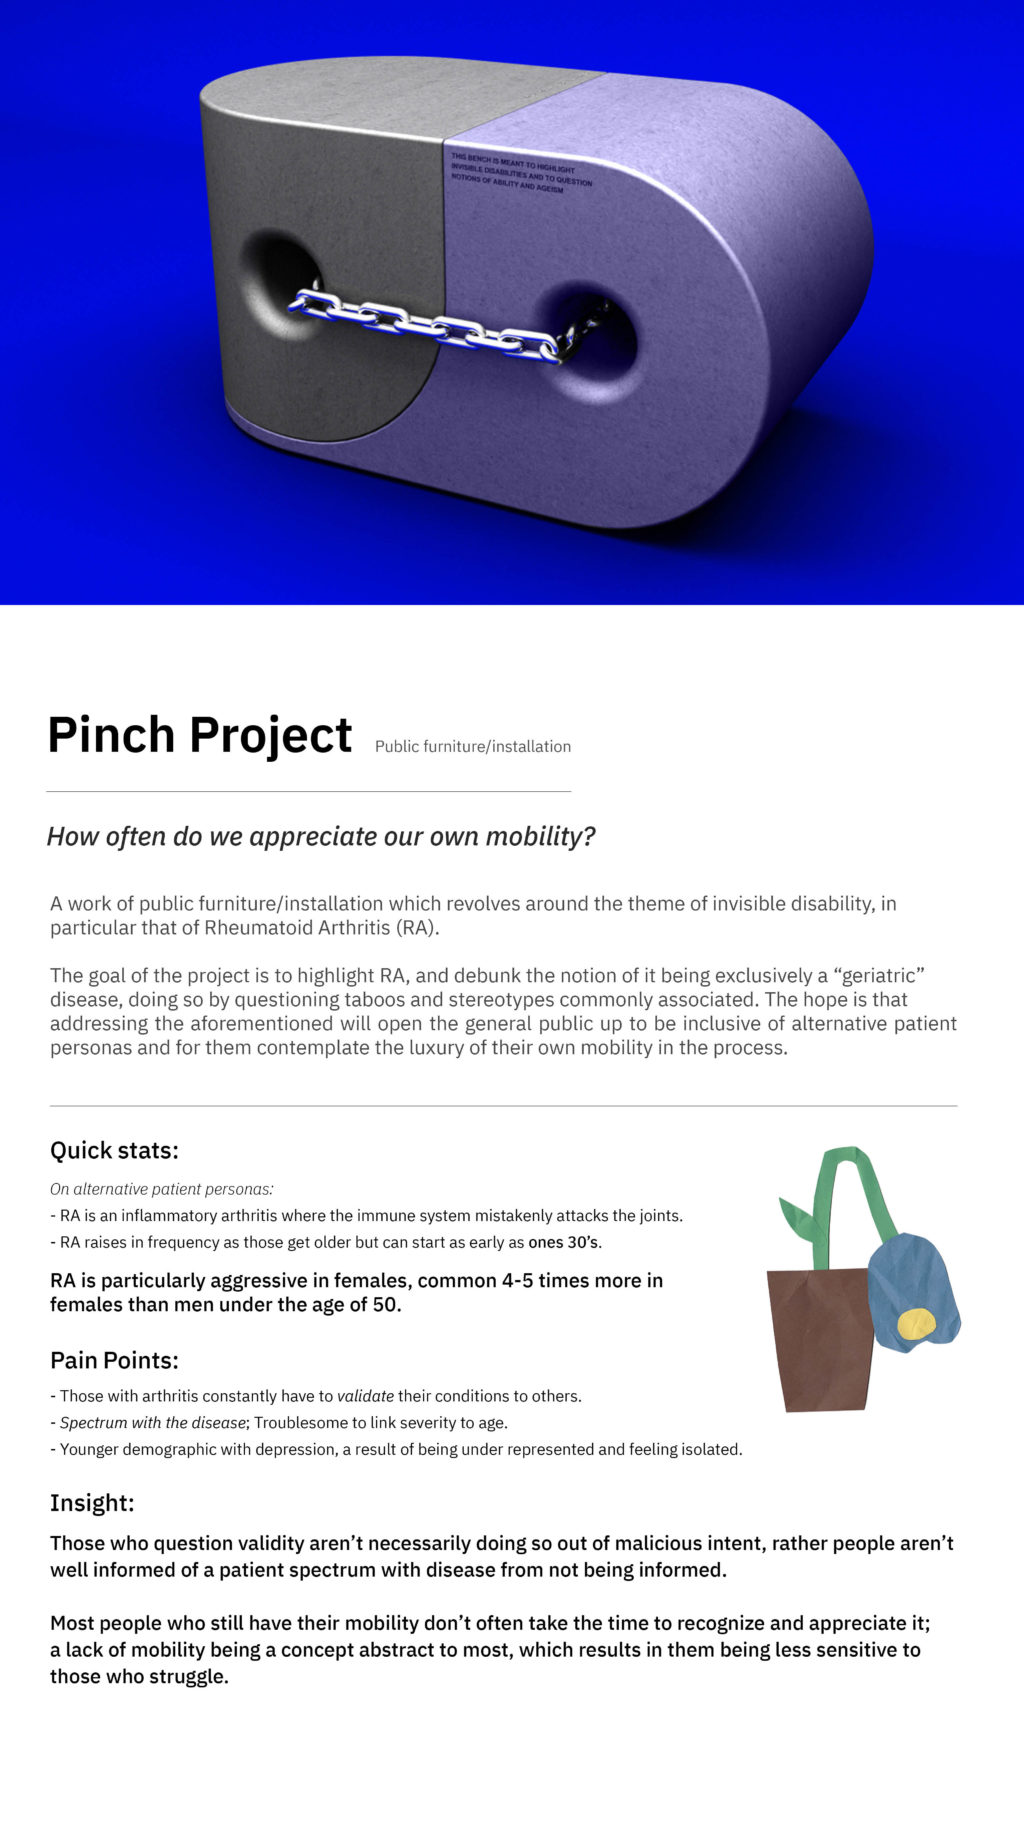 Pinch Project